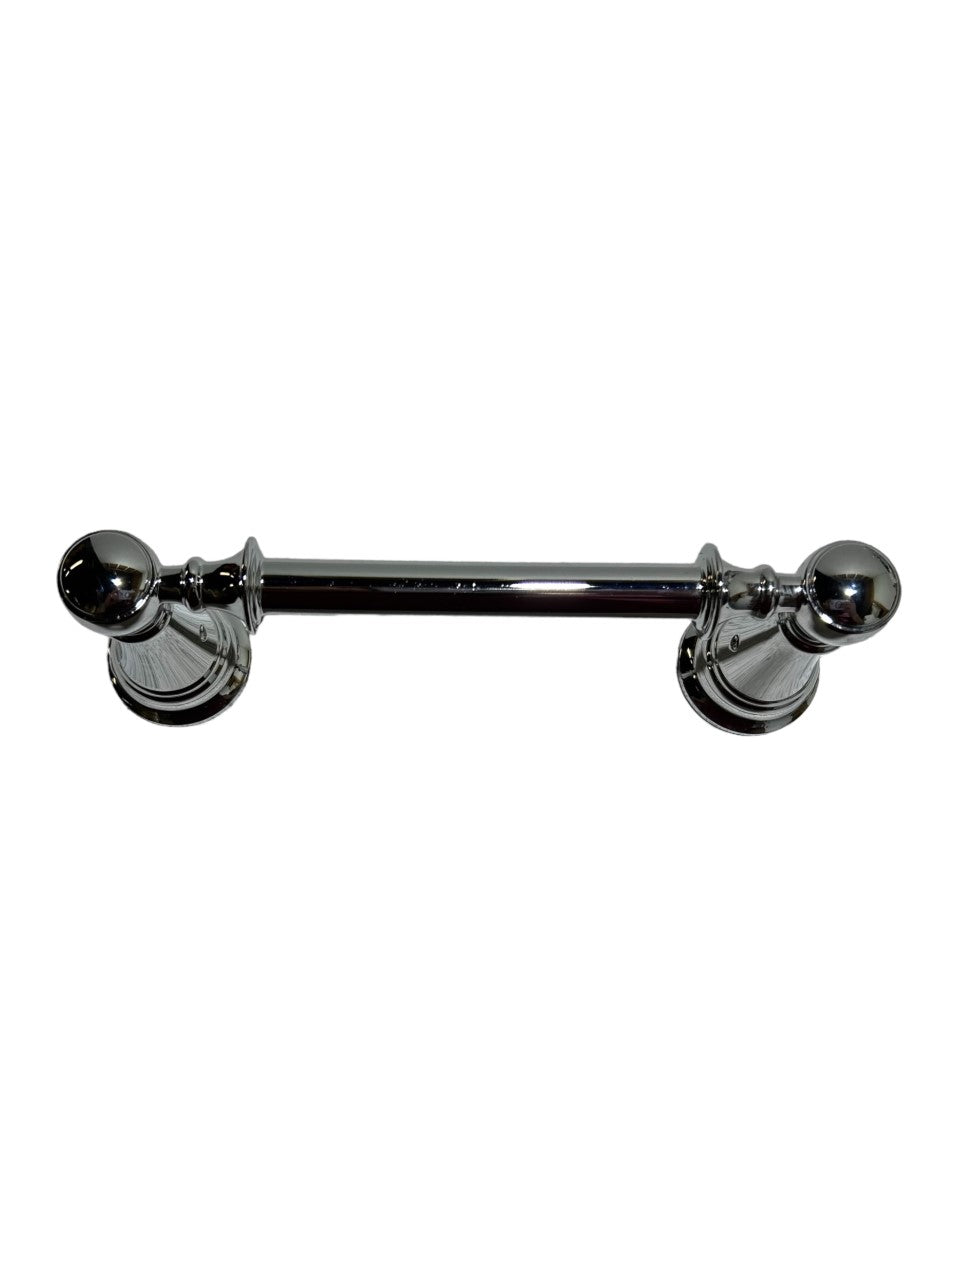 Moen Weymouth Pivoting Toilet Paper Holder - Oil Rubbed Bronze